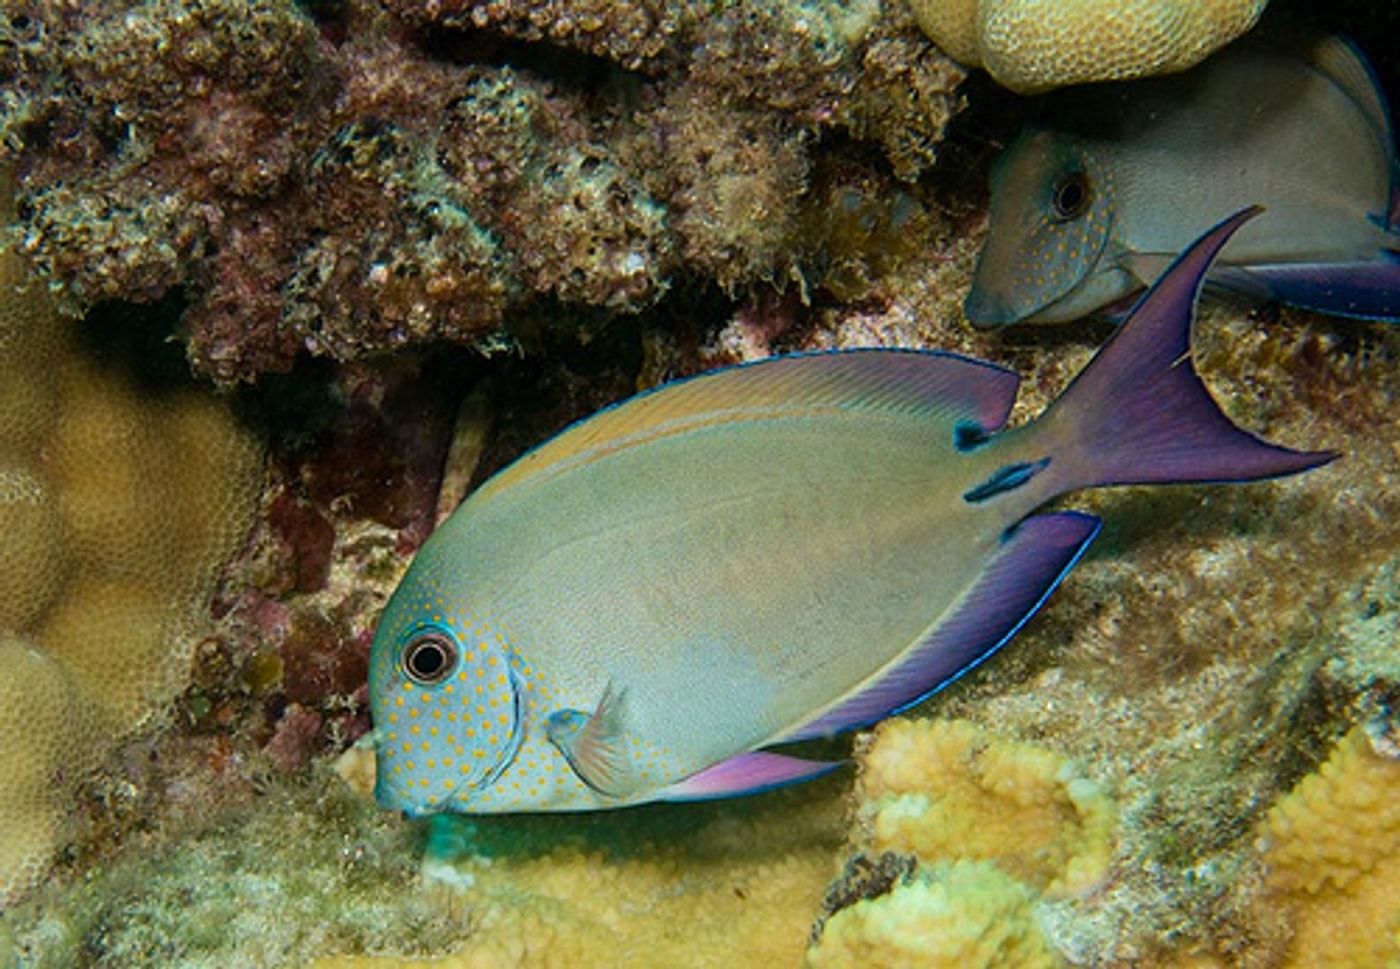 Epulopiscium is an intestinal symbiont of the surgeonfish.